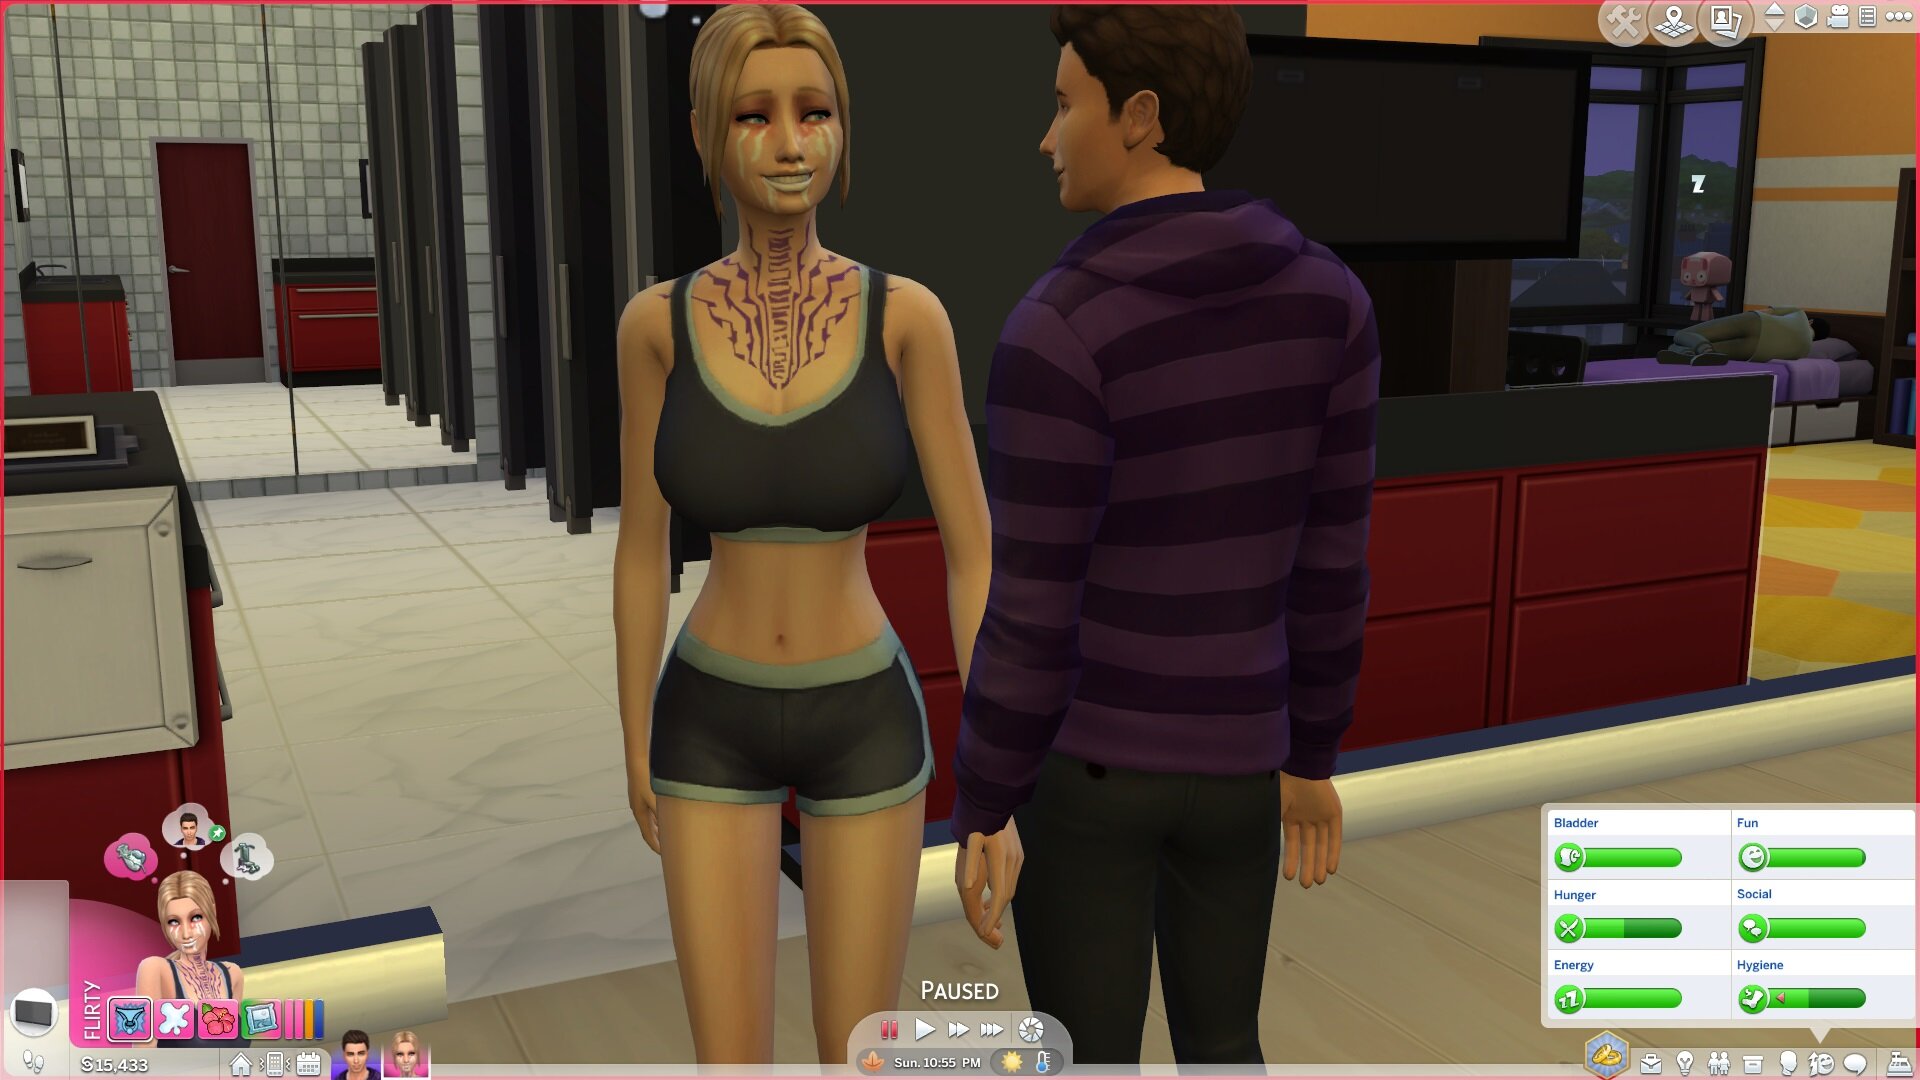 Wicked perversions mod sims 4.